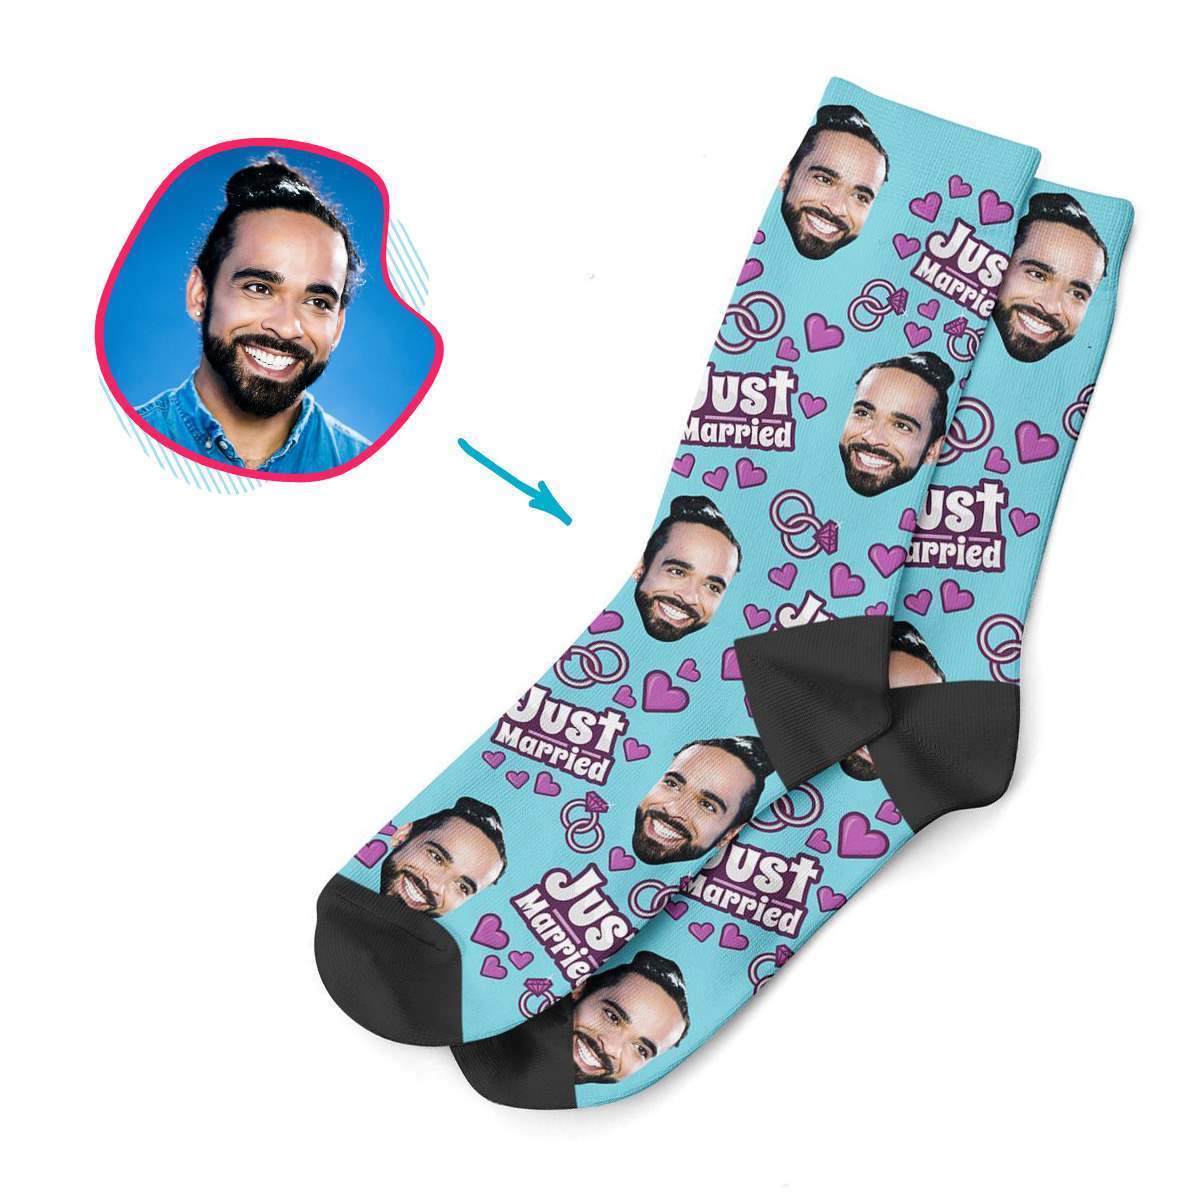 blue Just Married socks personalized with photo of face printed on them